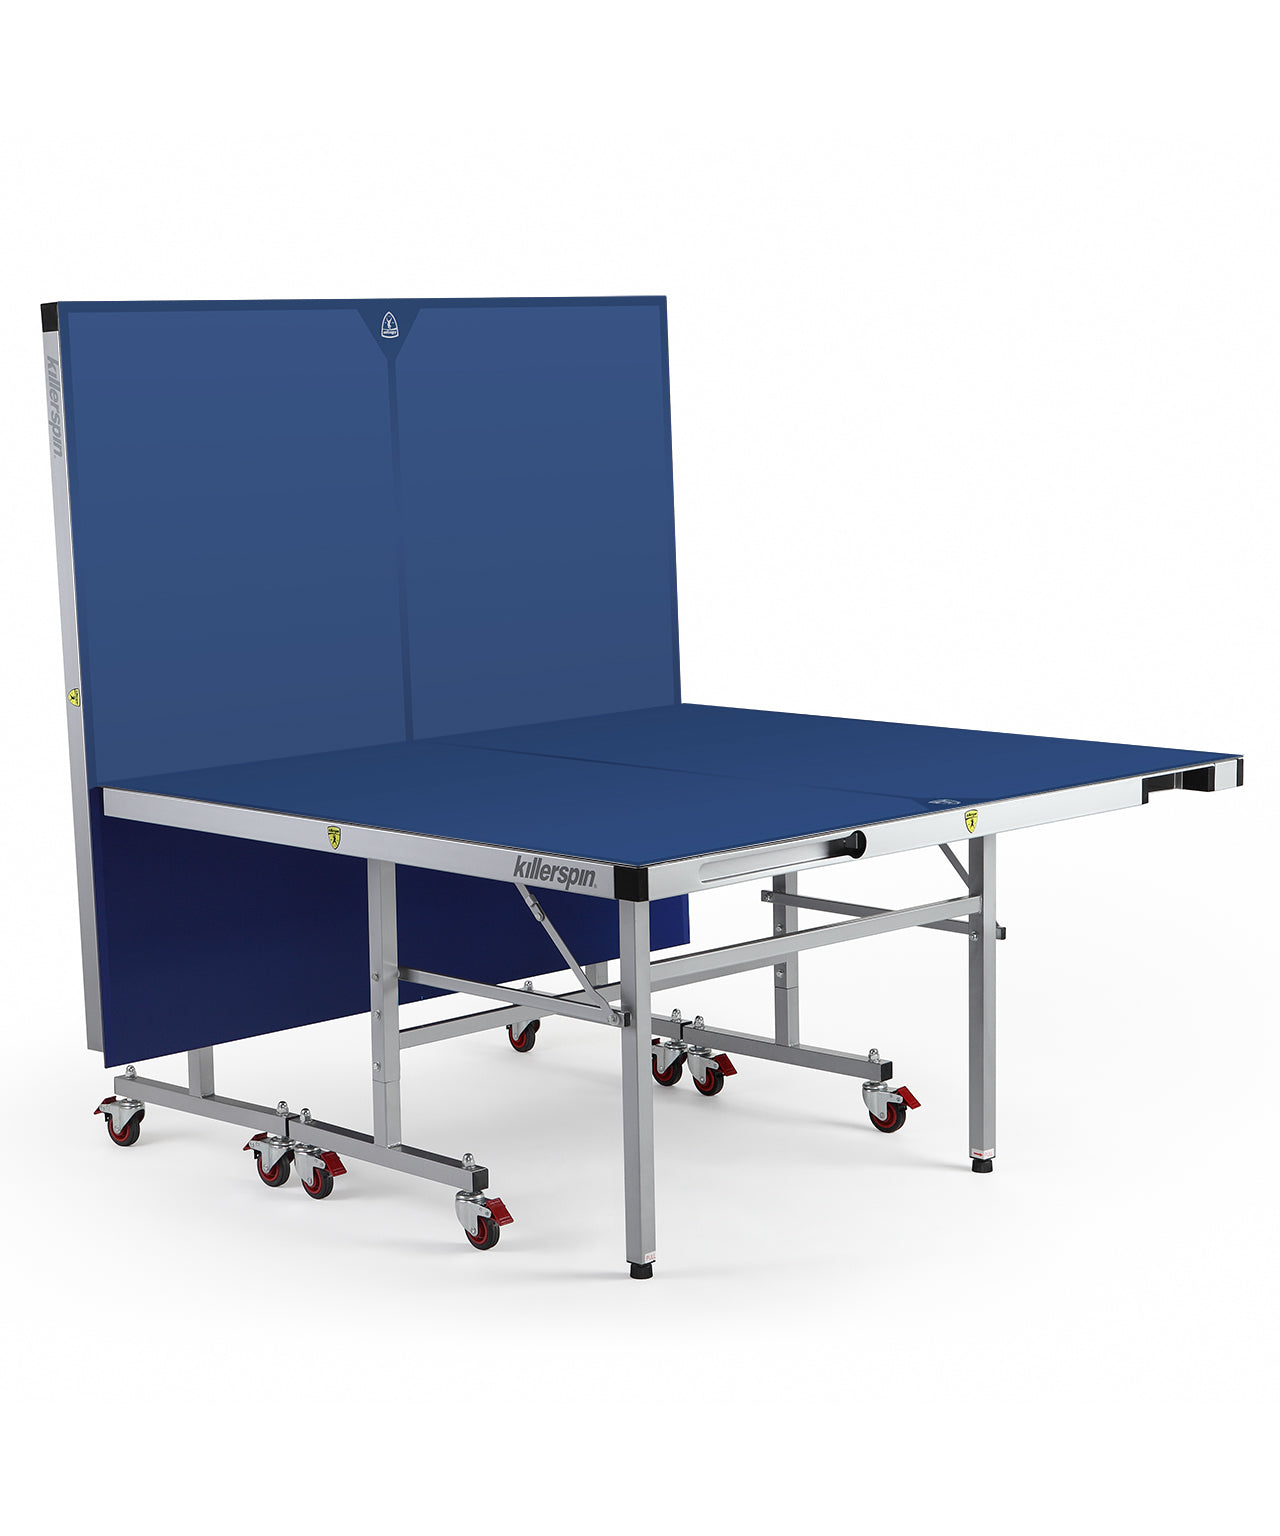 Killerspin Outdoor Ping Pong Blue Table MyT7 Breeze - Playback Position